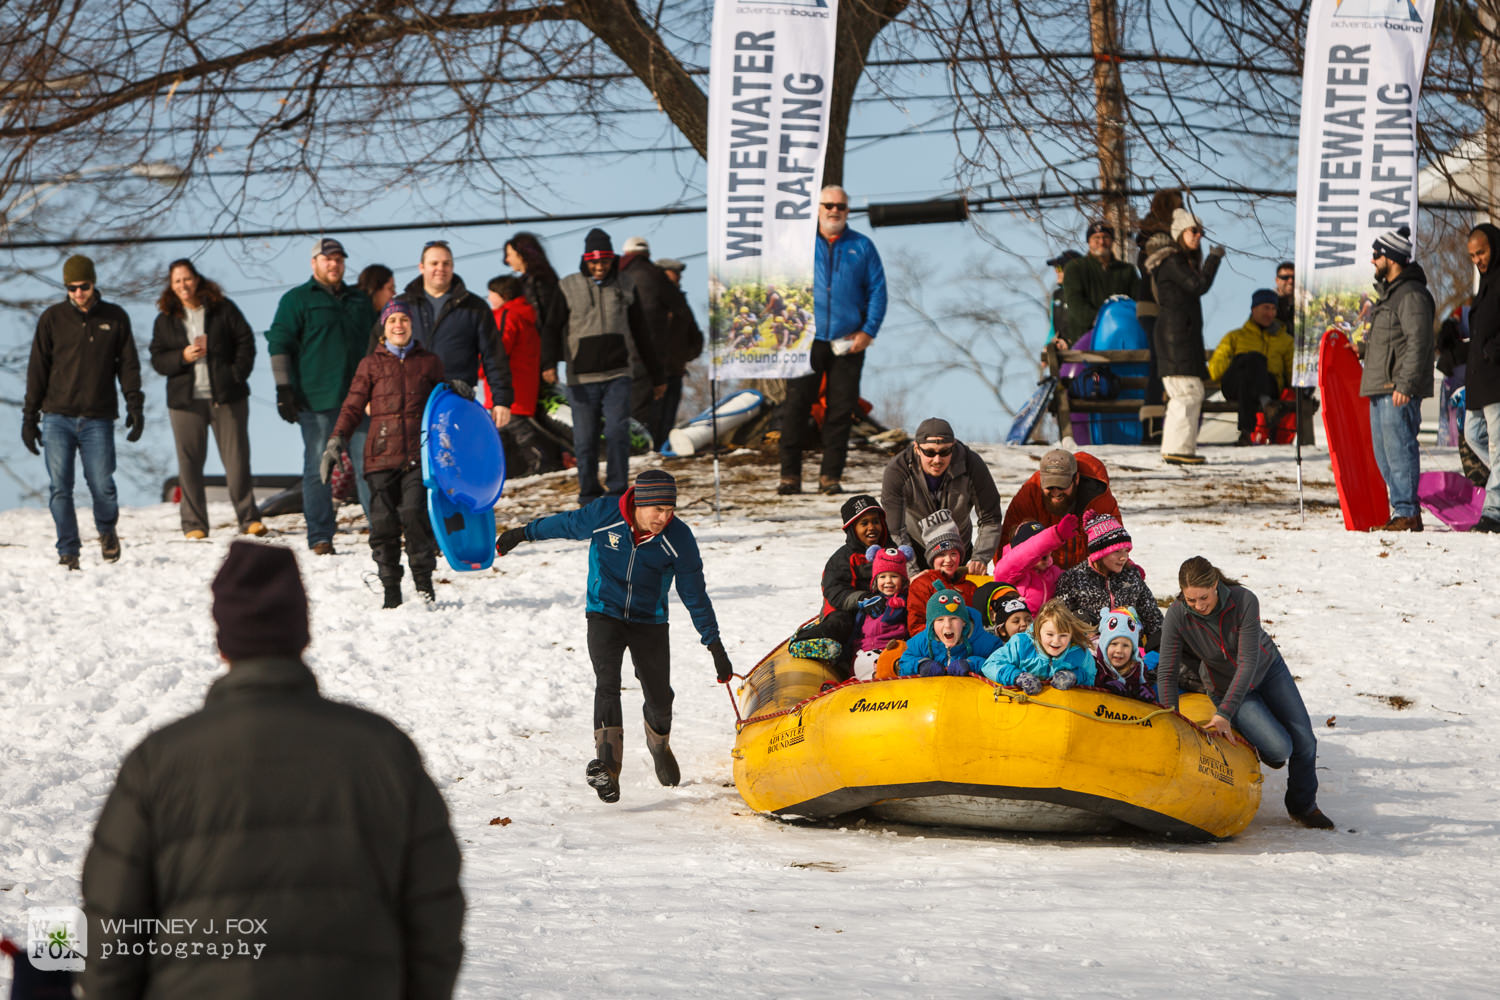 The Welcome to Winter Festival is brought to you by WinterKids and Portland Parks, Recreation & Facilities. Each year, hundreds of Mainers experience the thrill of sledding, snowshoeing, ice skating, and much more at our annual Welcome to Winter Festival